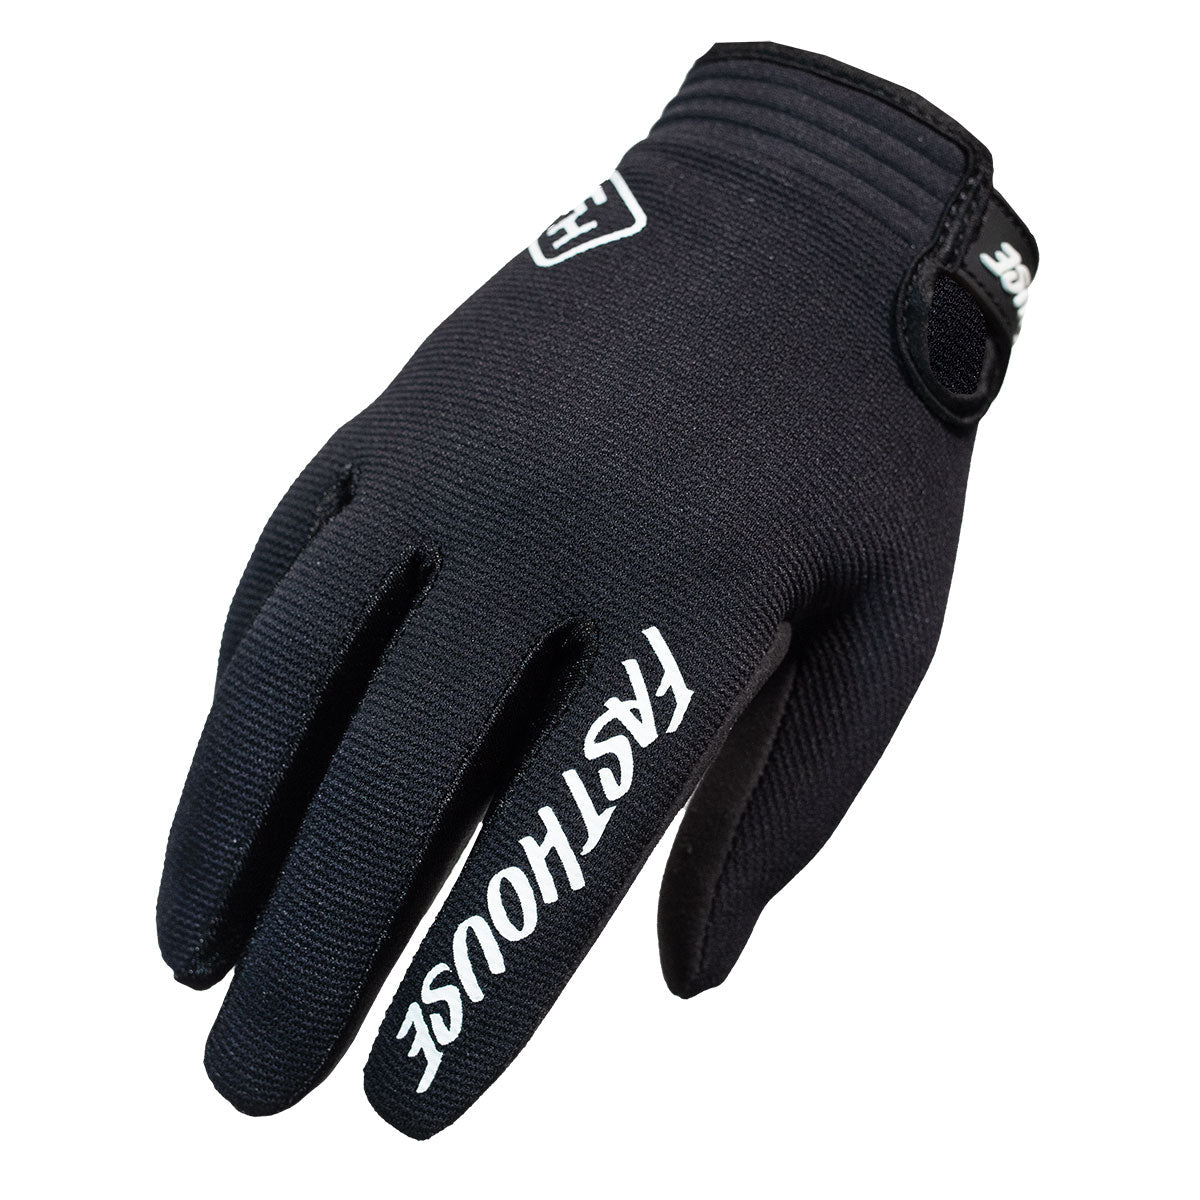 Fasthouse Carbon Glove -Black